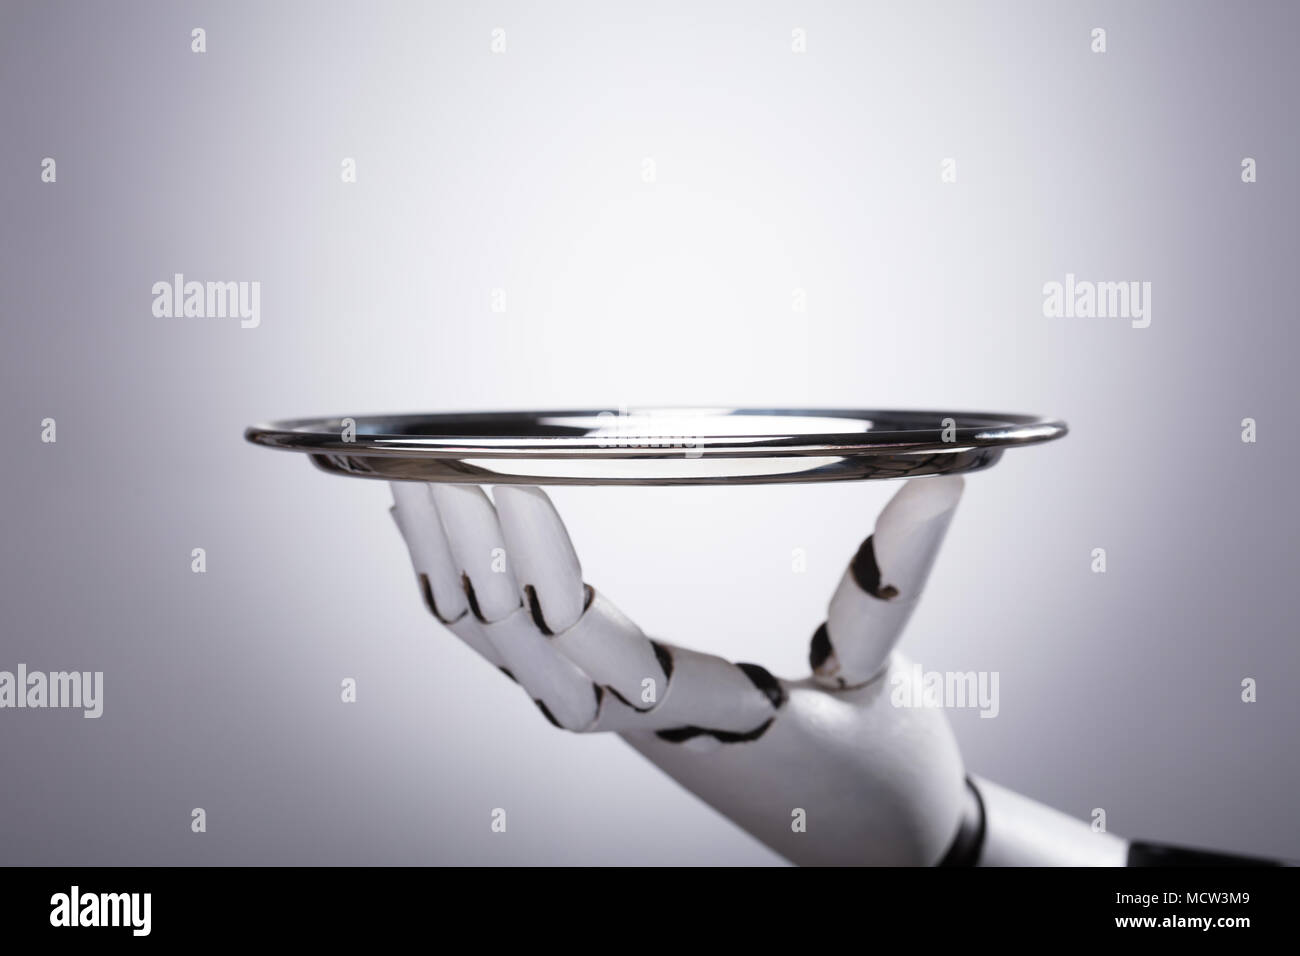 Robot Hand Holding Empty Plate Against Grey Background Stock Photo